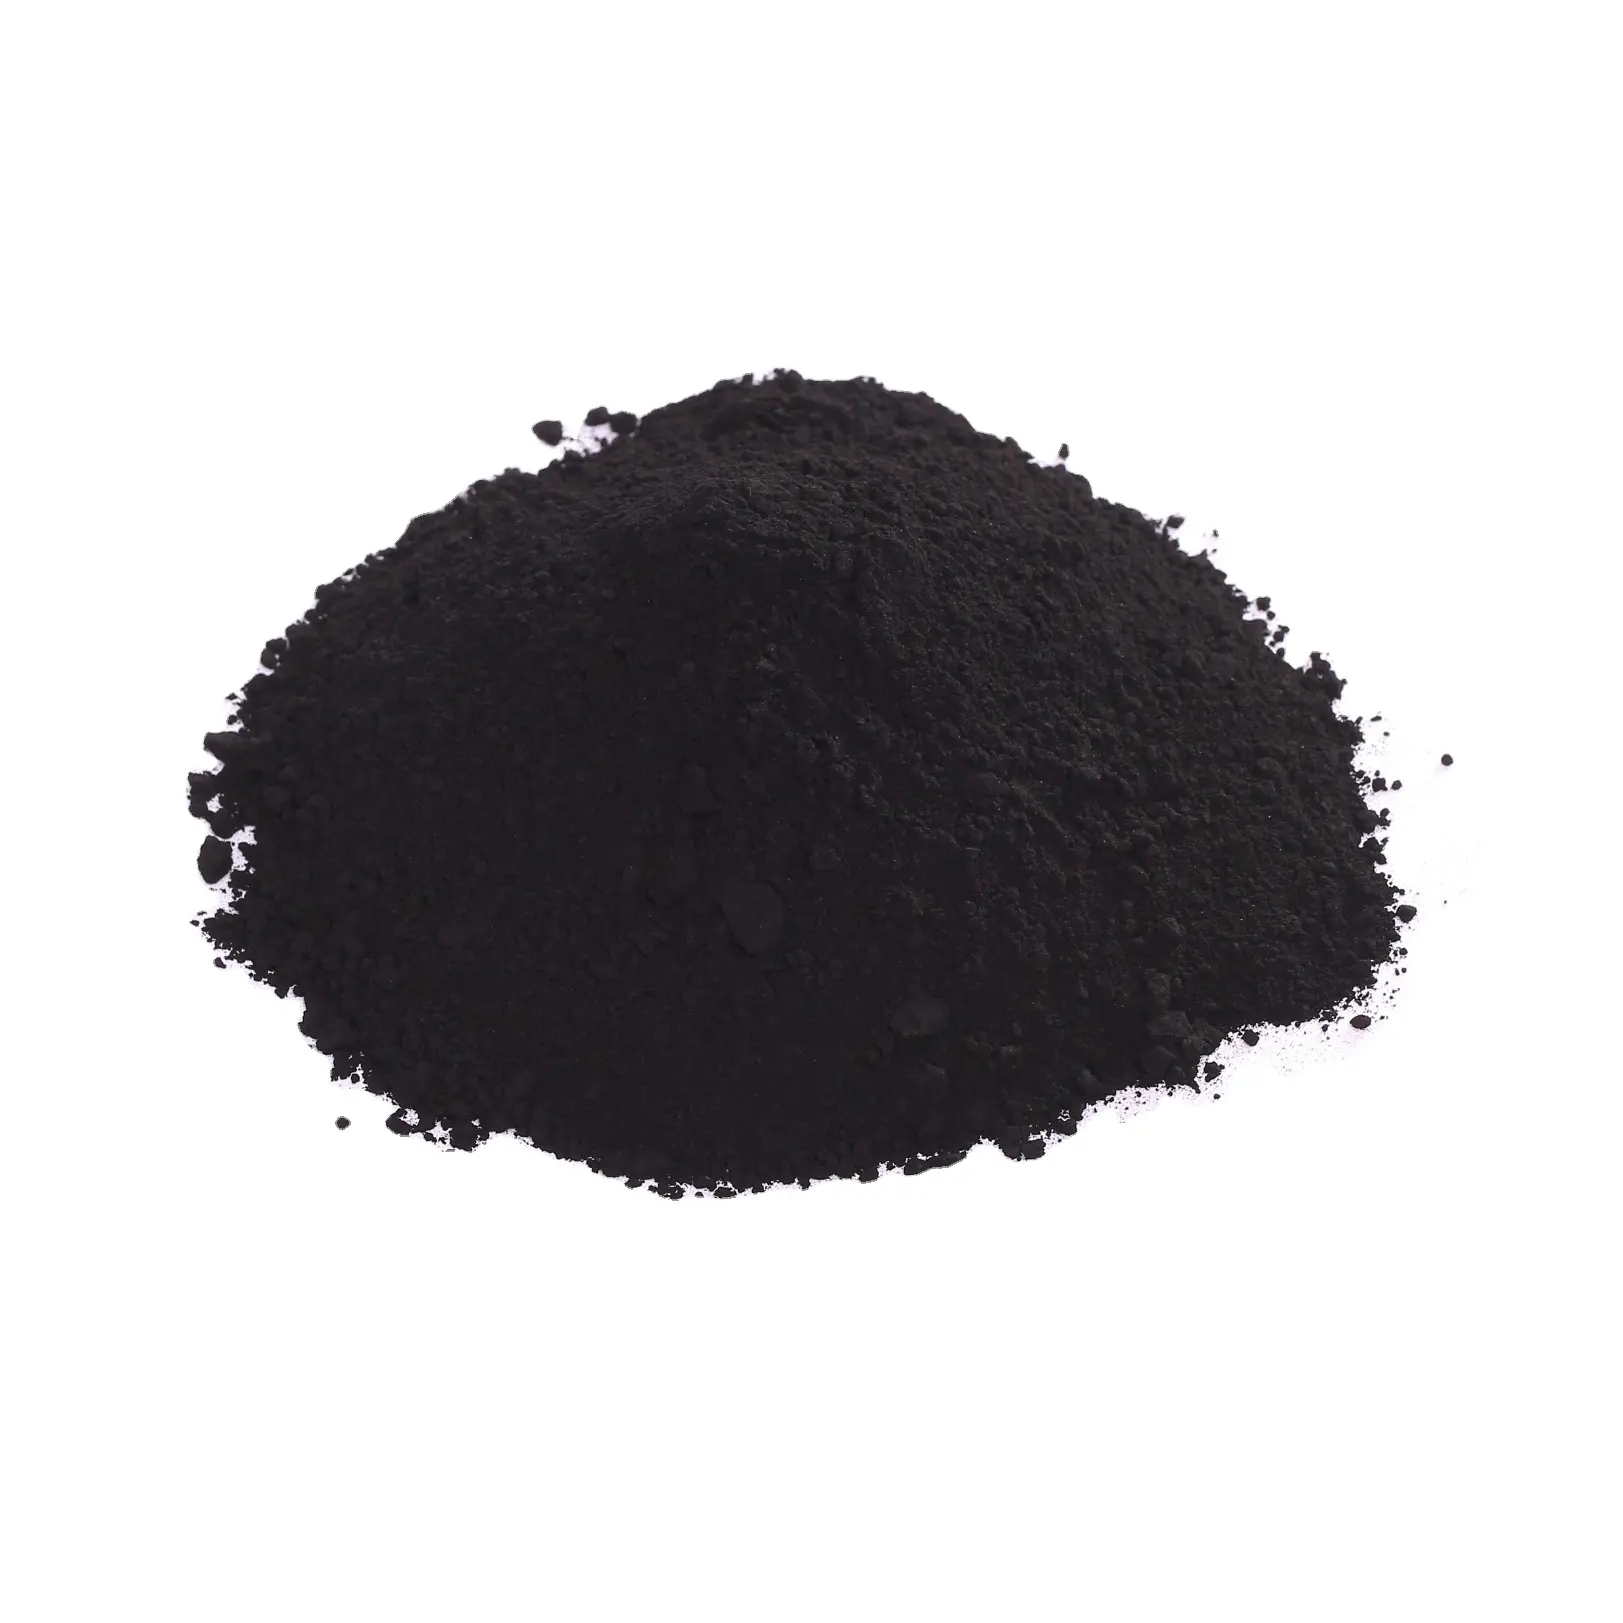 Food Grade Powder Activated Carbon Company Price Wood Based Activated Carbon For Sugar Decolorization